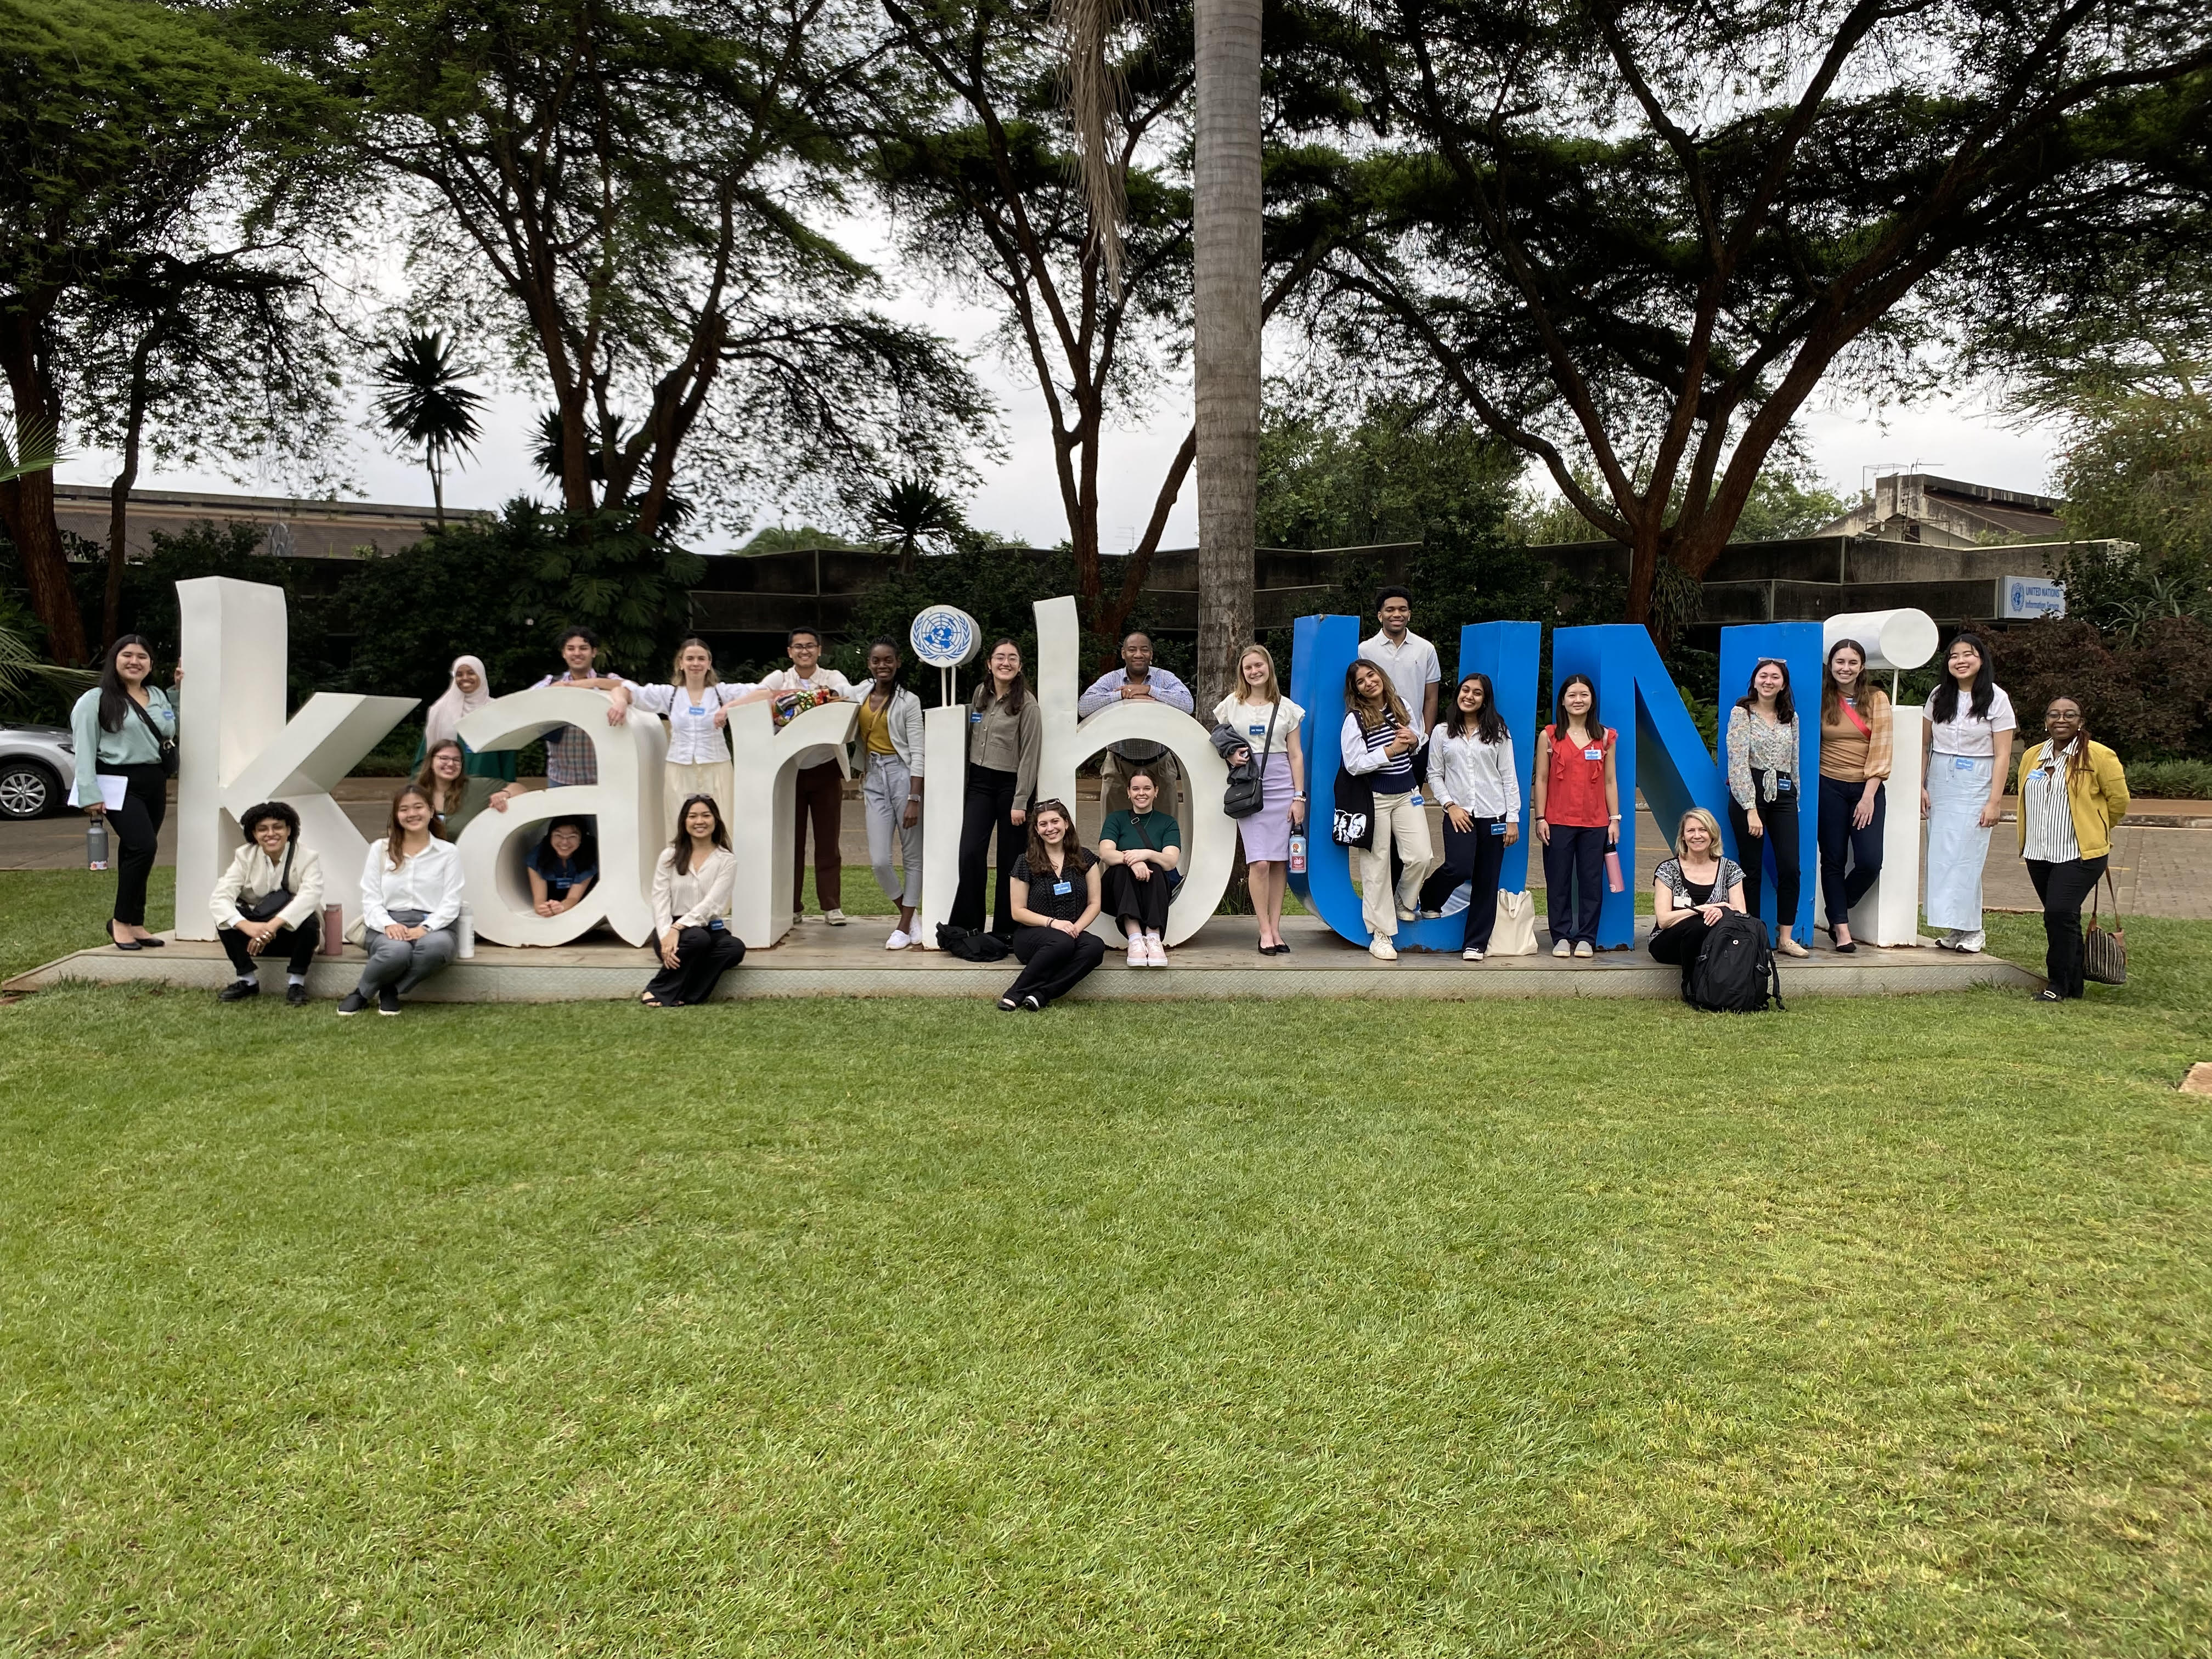 Many people pose around large letters that spell "karibUNi"